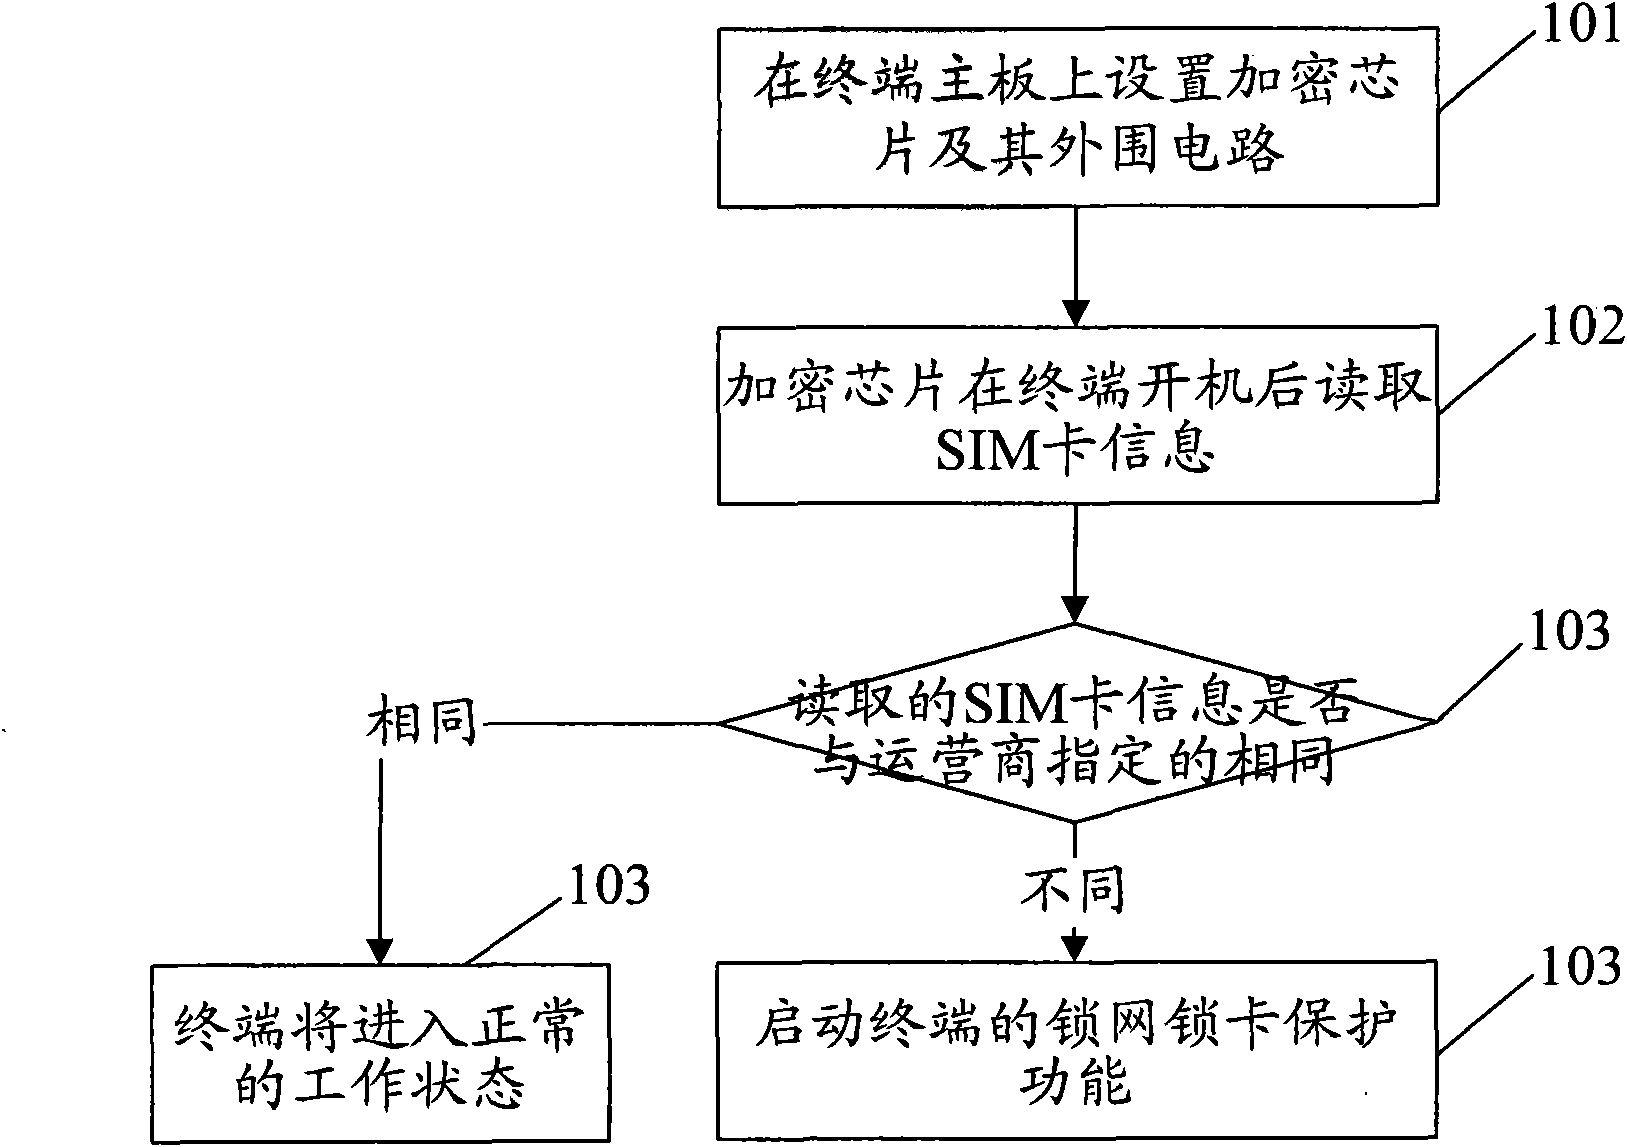 Method for realizing network and card locking function of terminal and terminal